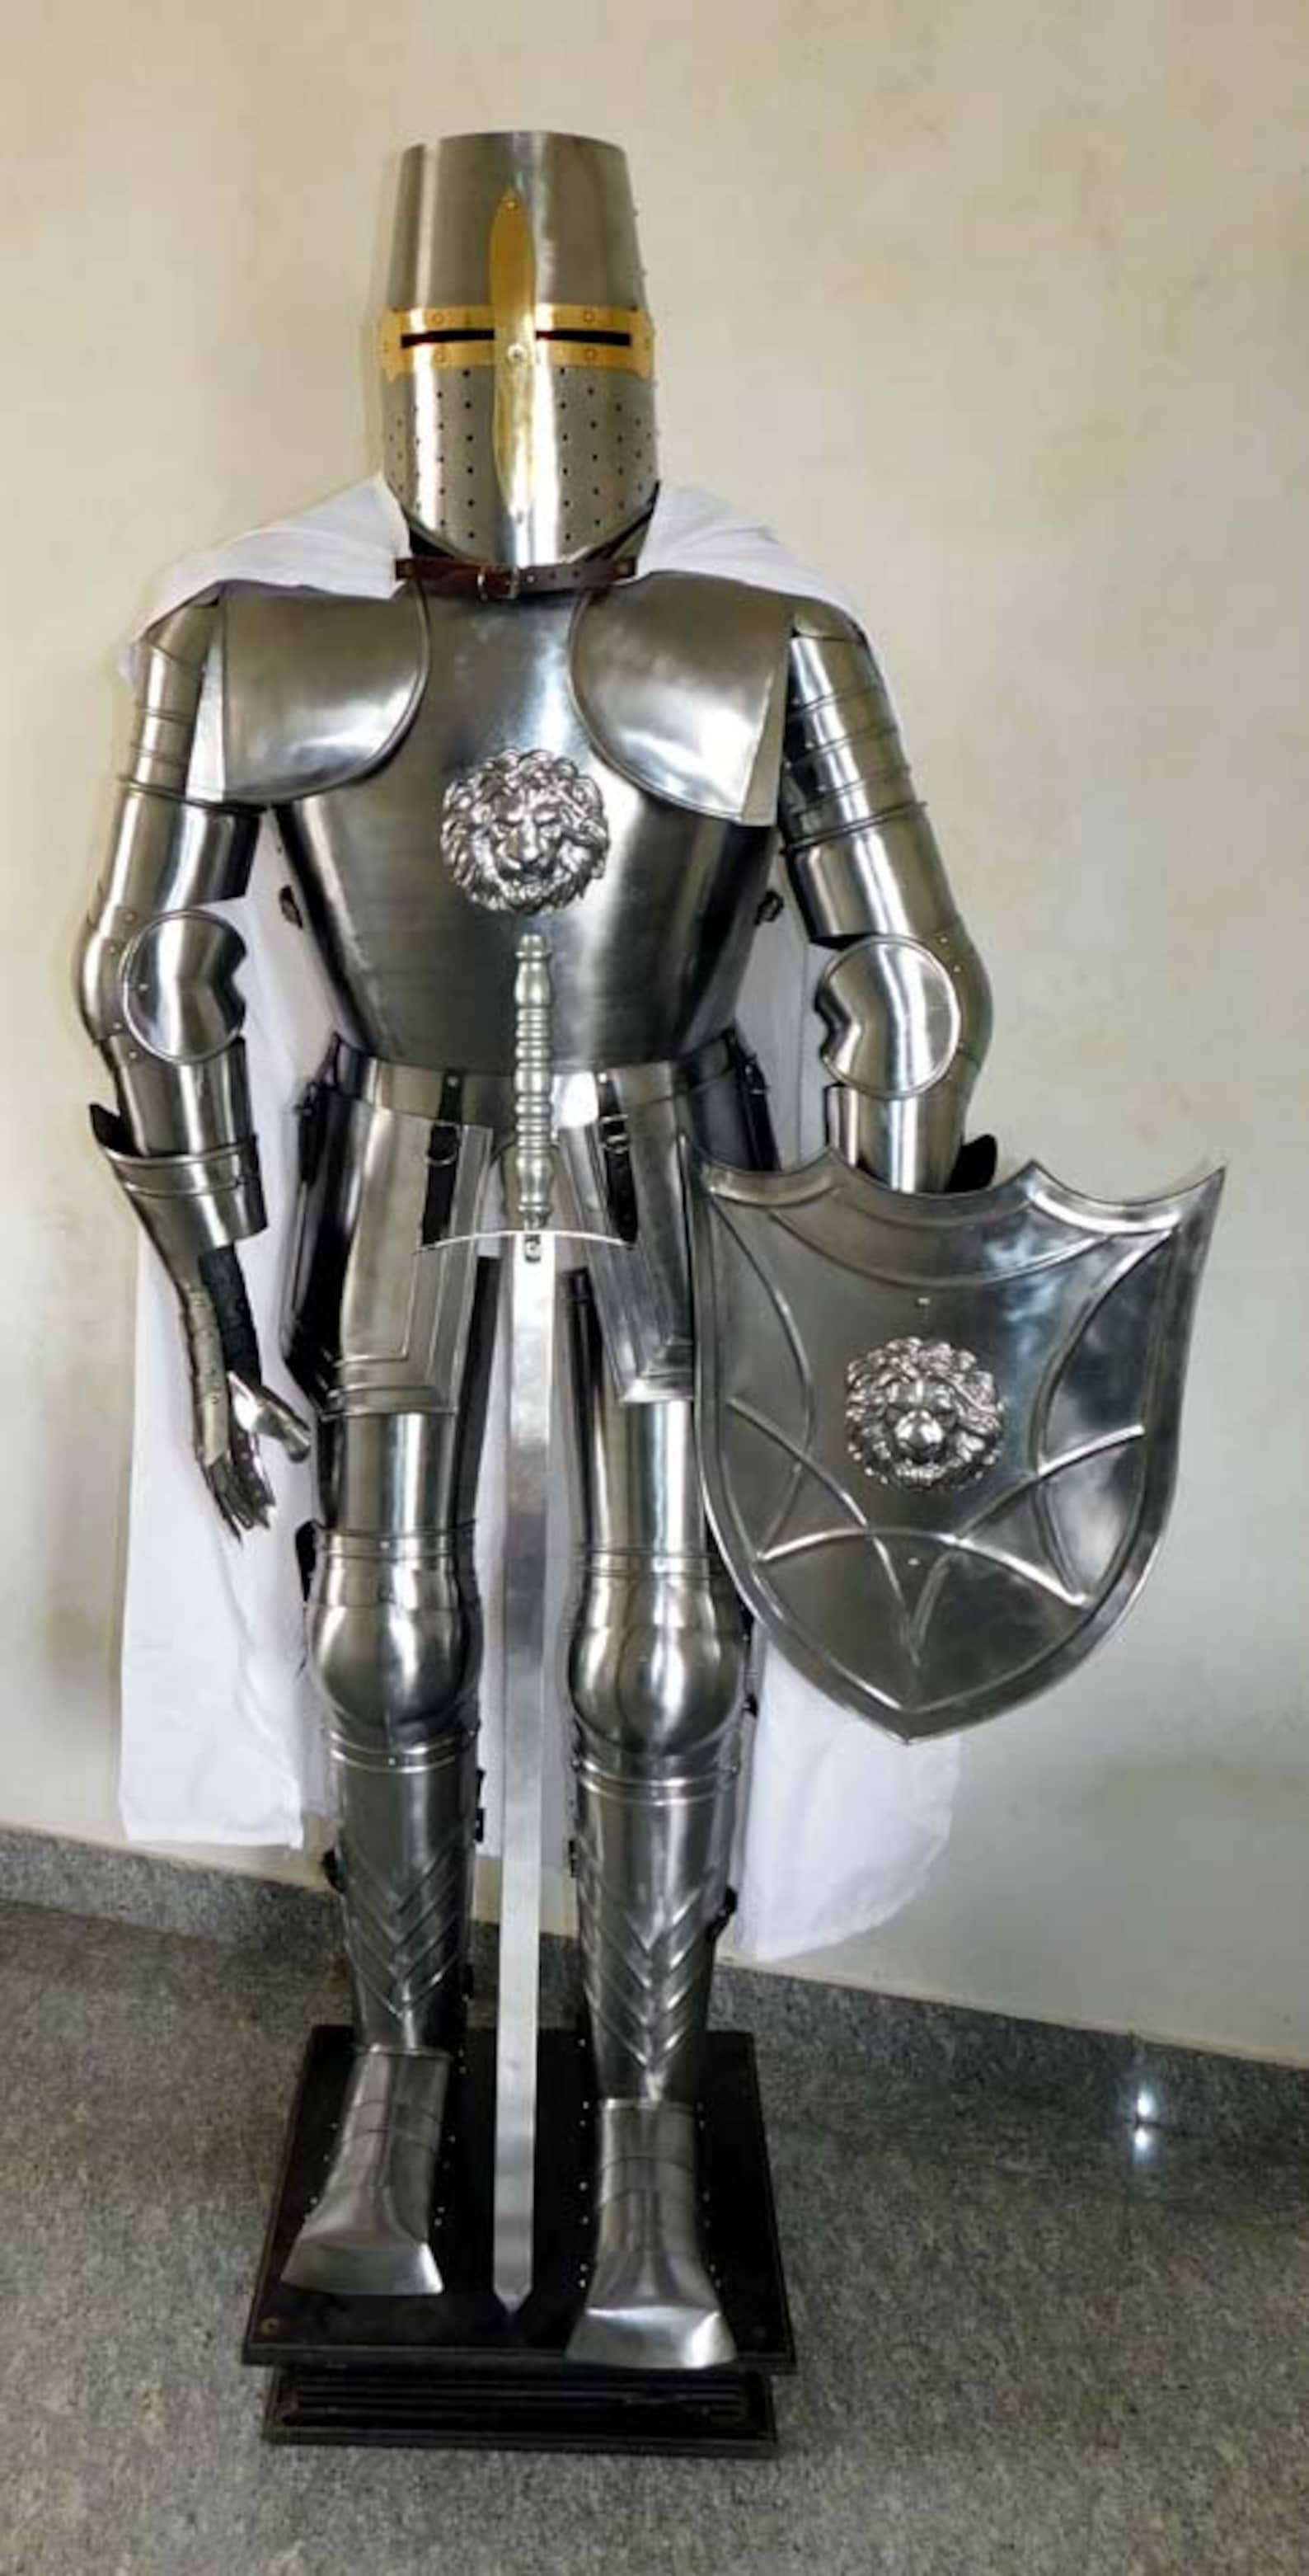 Medieval Knight Suit Of Armor Combat Full Body Wearable With 273